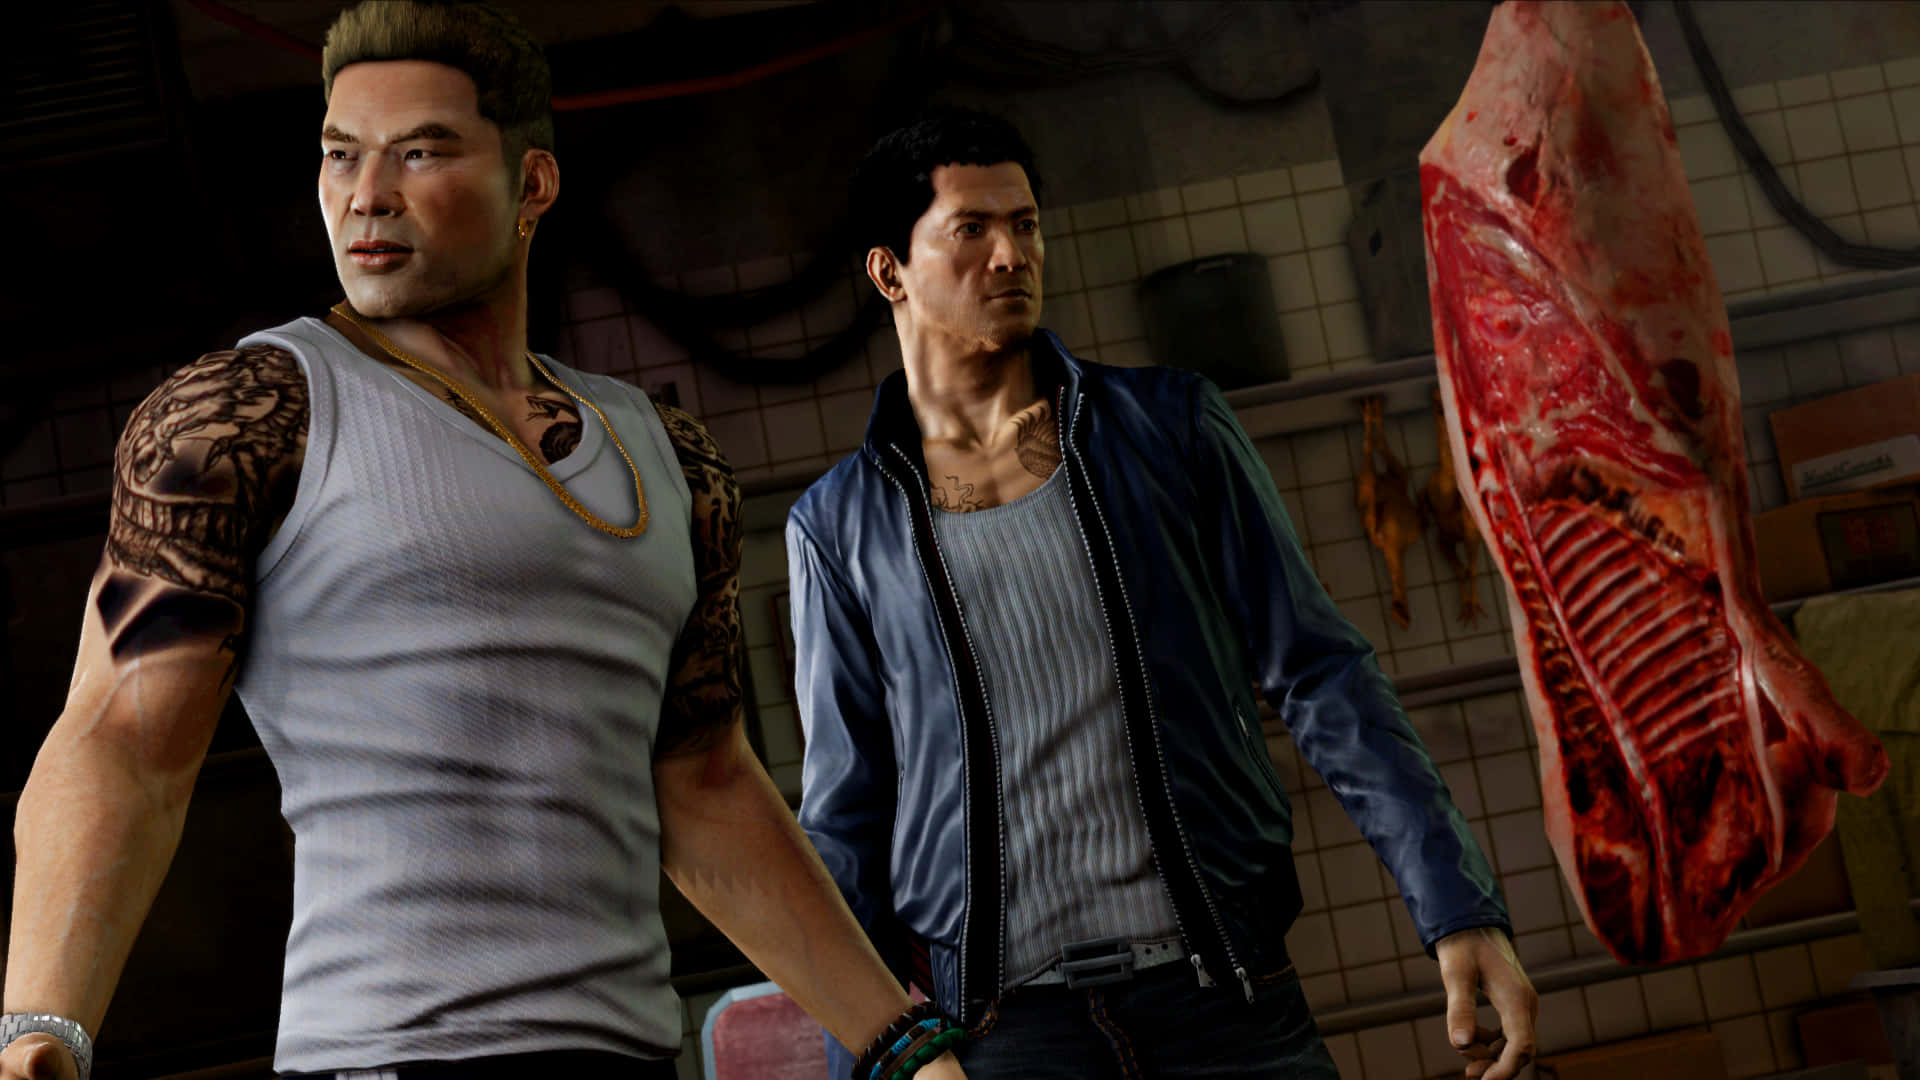 Join the Hong Kong Underwold in Sleeping Dogs 2 Wallpaper